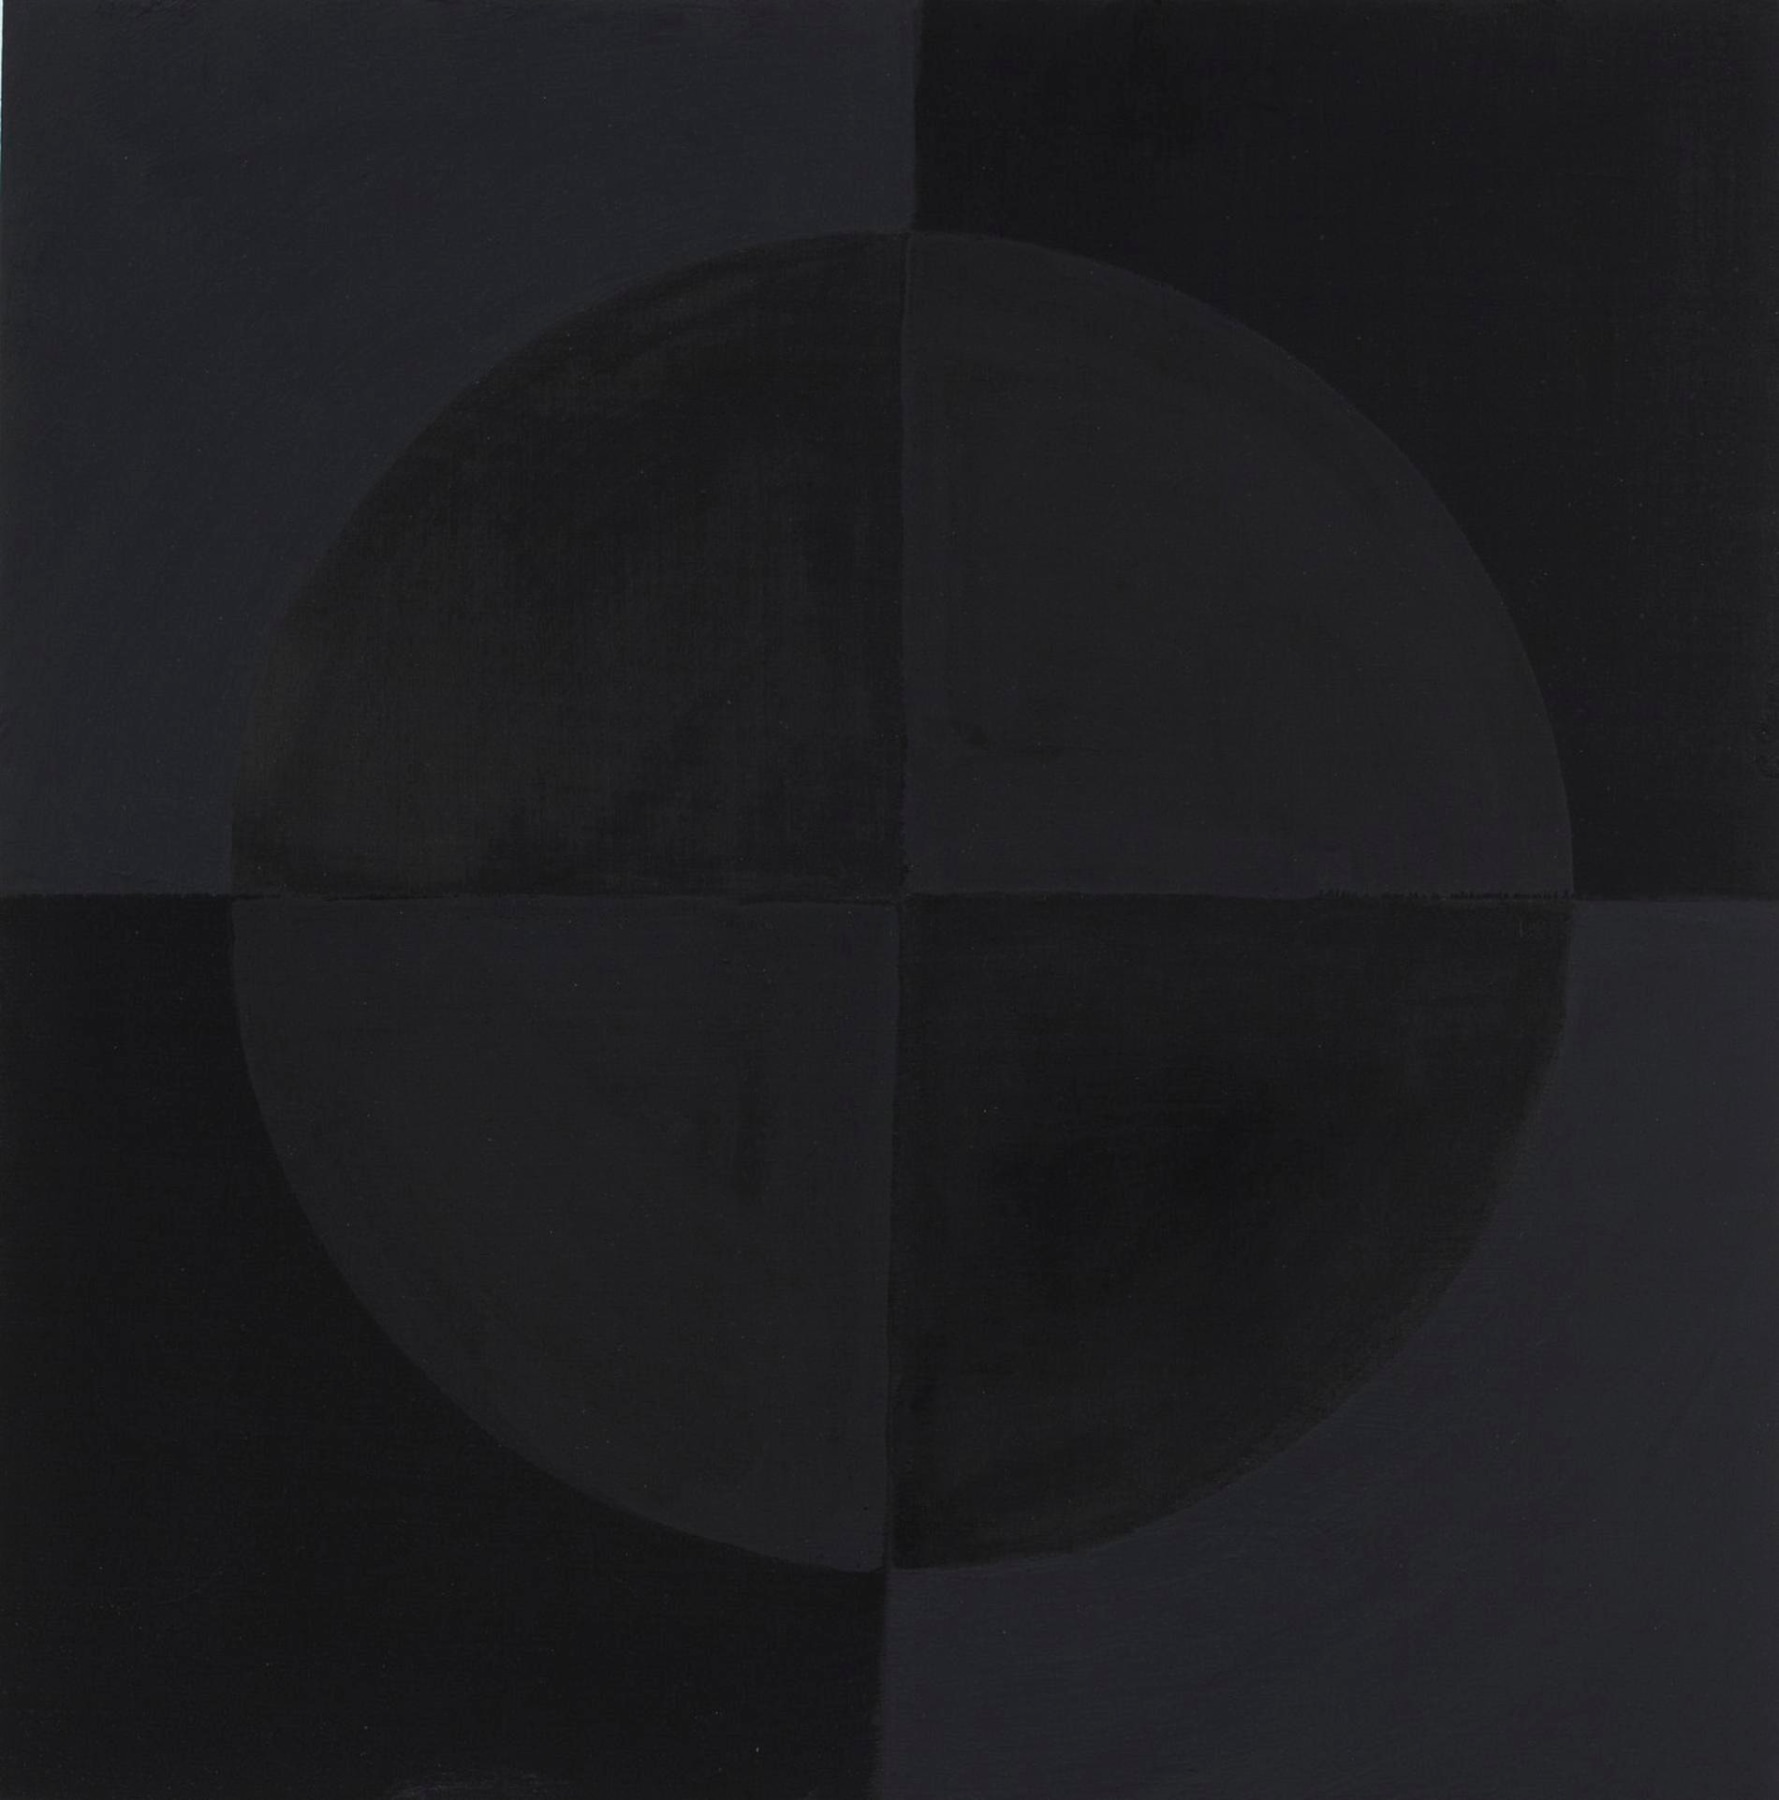 Abstract painting divided into four squares with a circle in the middle